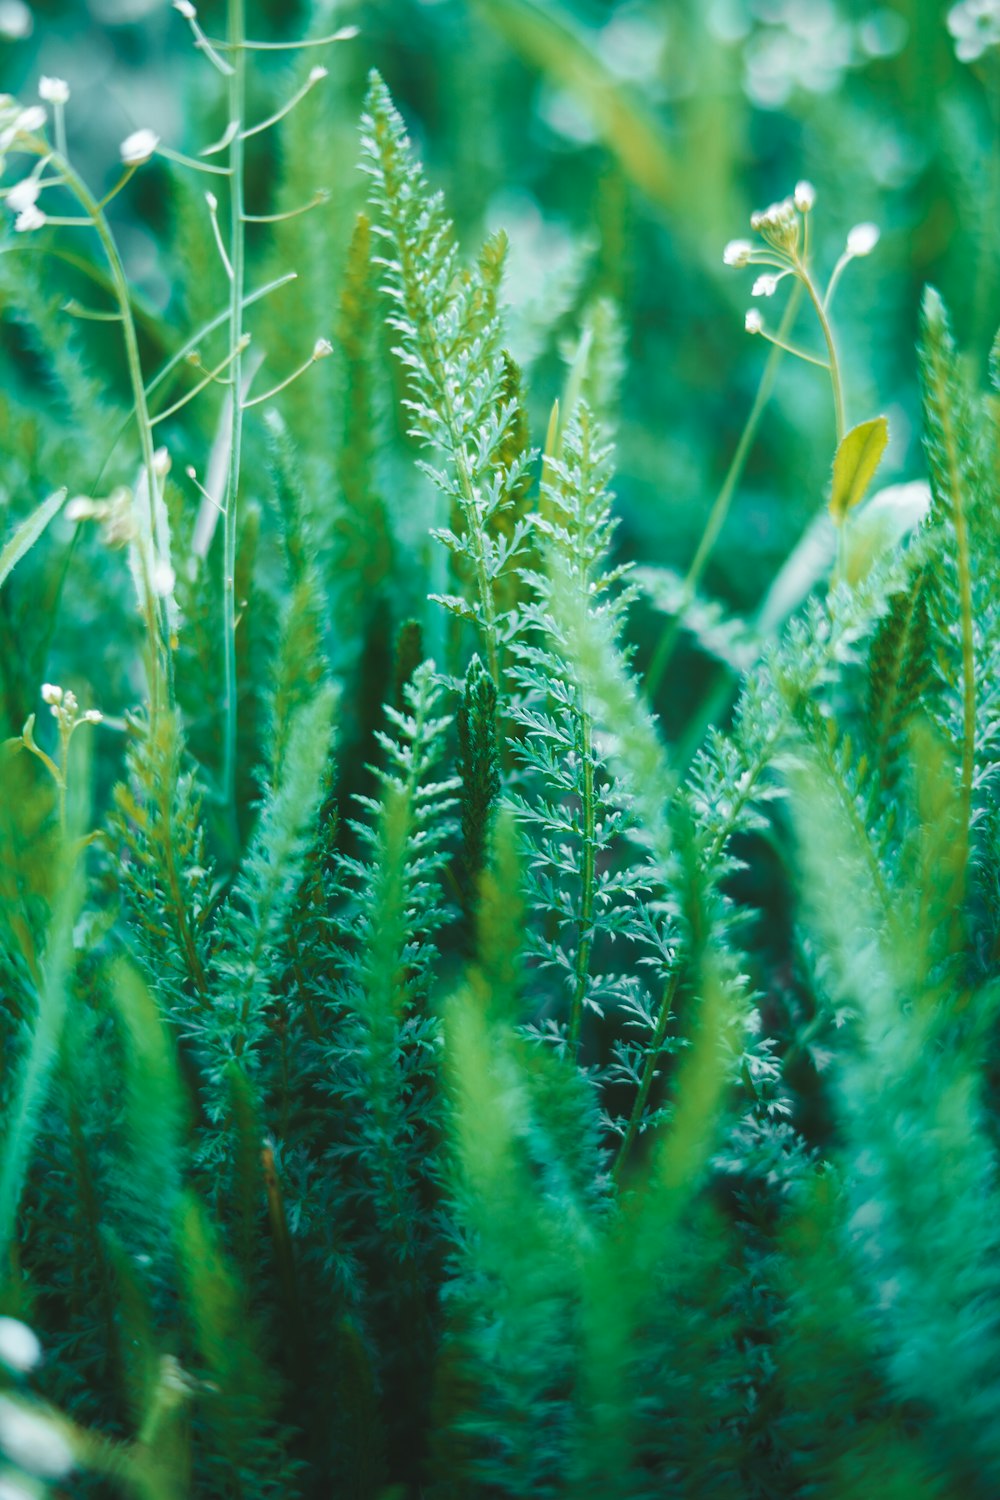 a close up of some green plants in a field